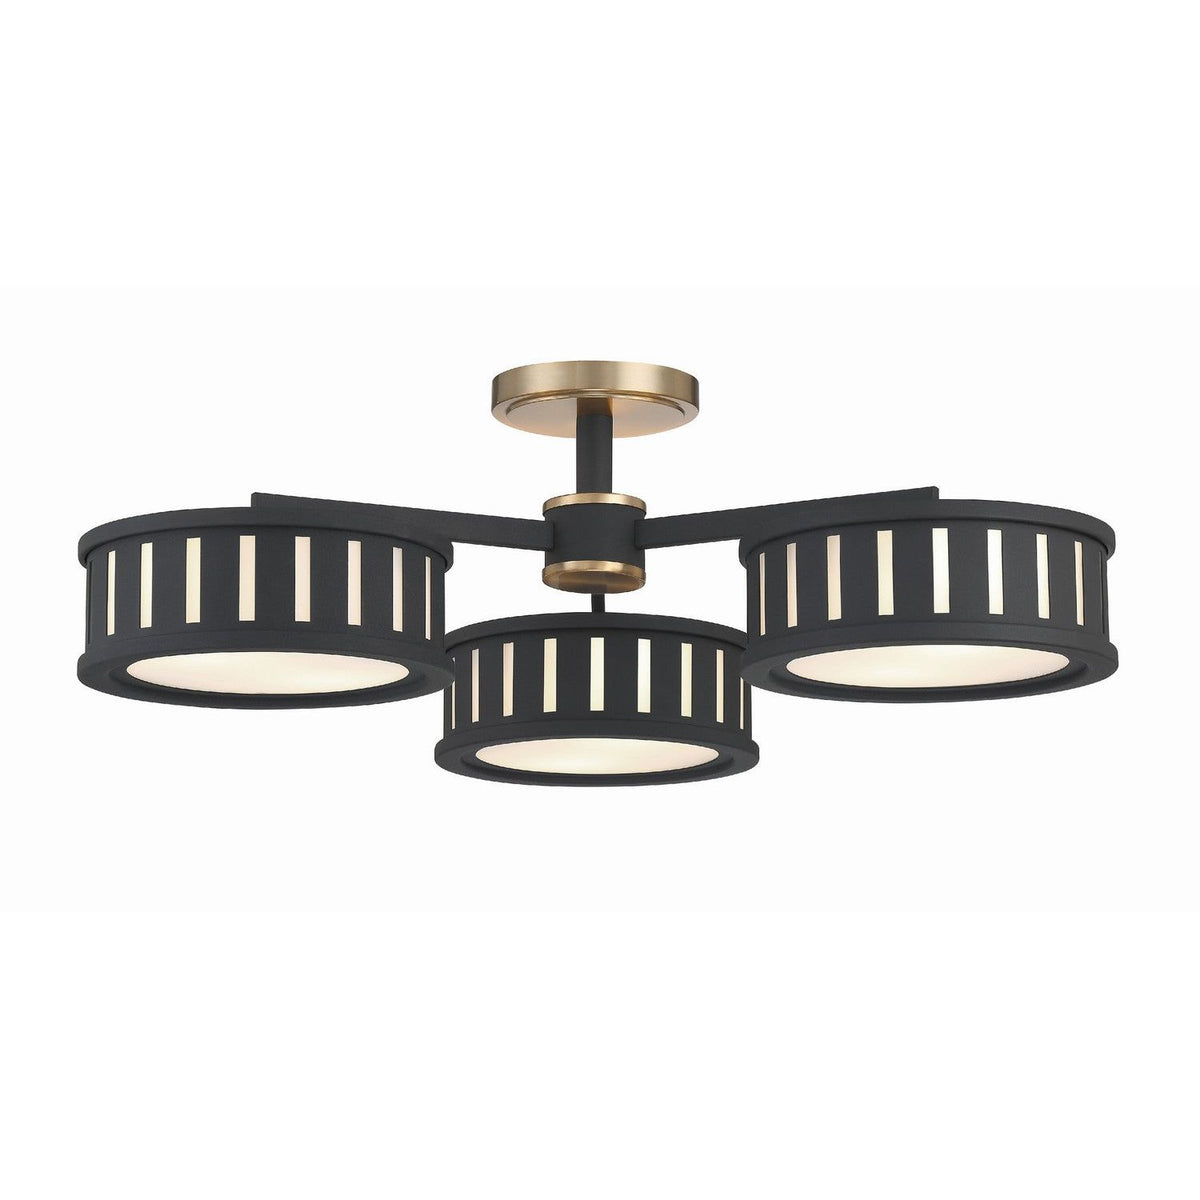 Crystorama - KEN-8300-VG-BF - Six Light Ceiling Mount - Kendal - Vibrant Gold / Black Forged